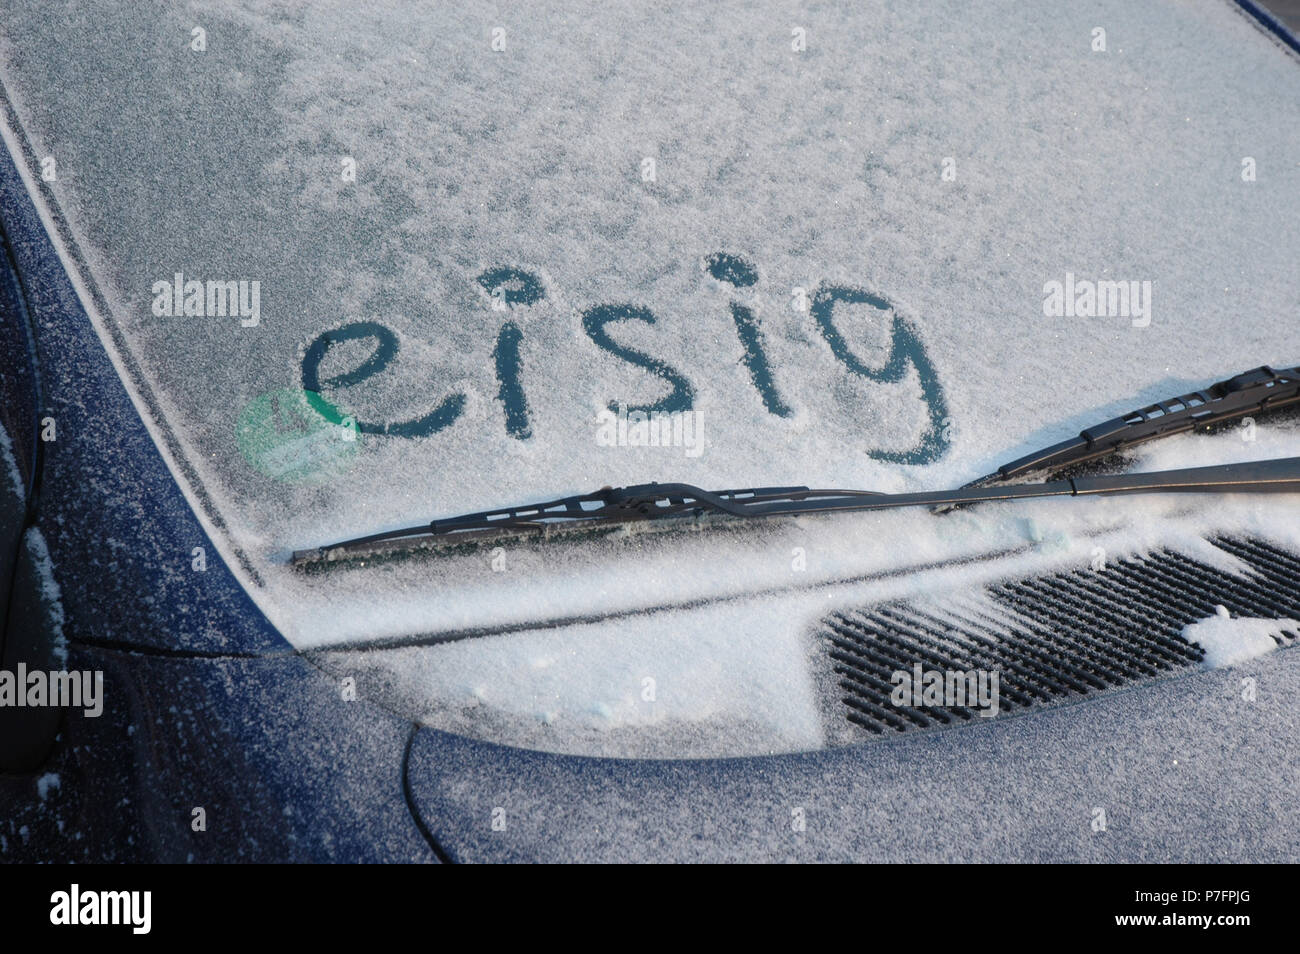 Snowy car window with the word icy, Germany Stock Photo